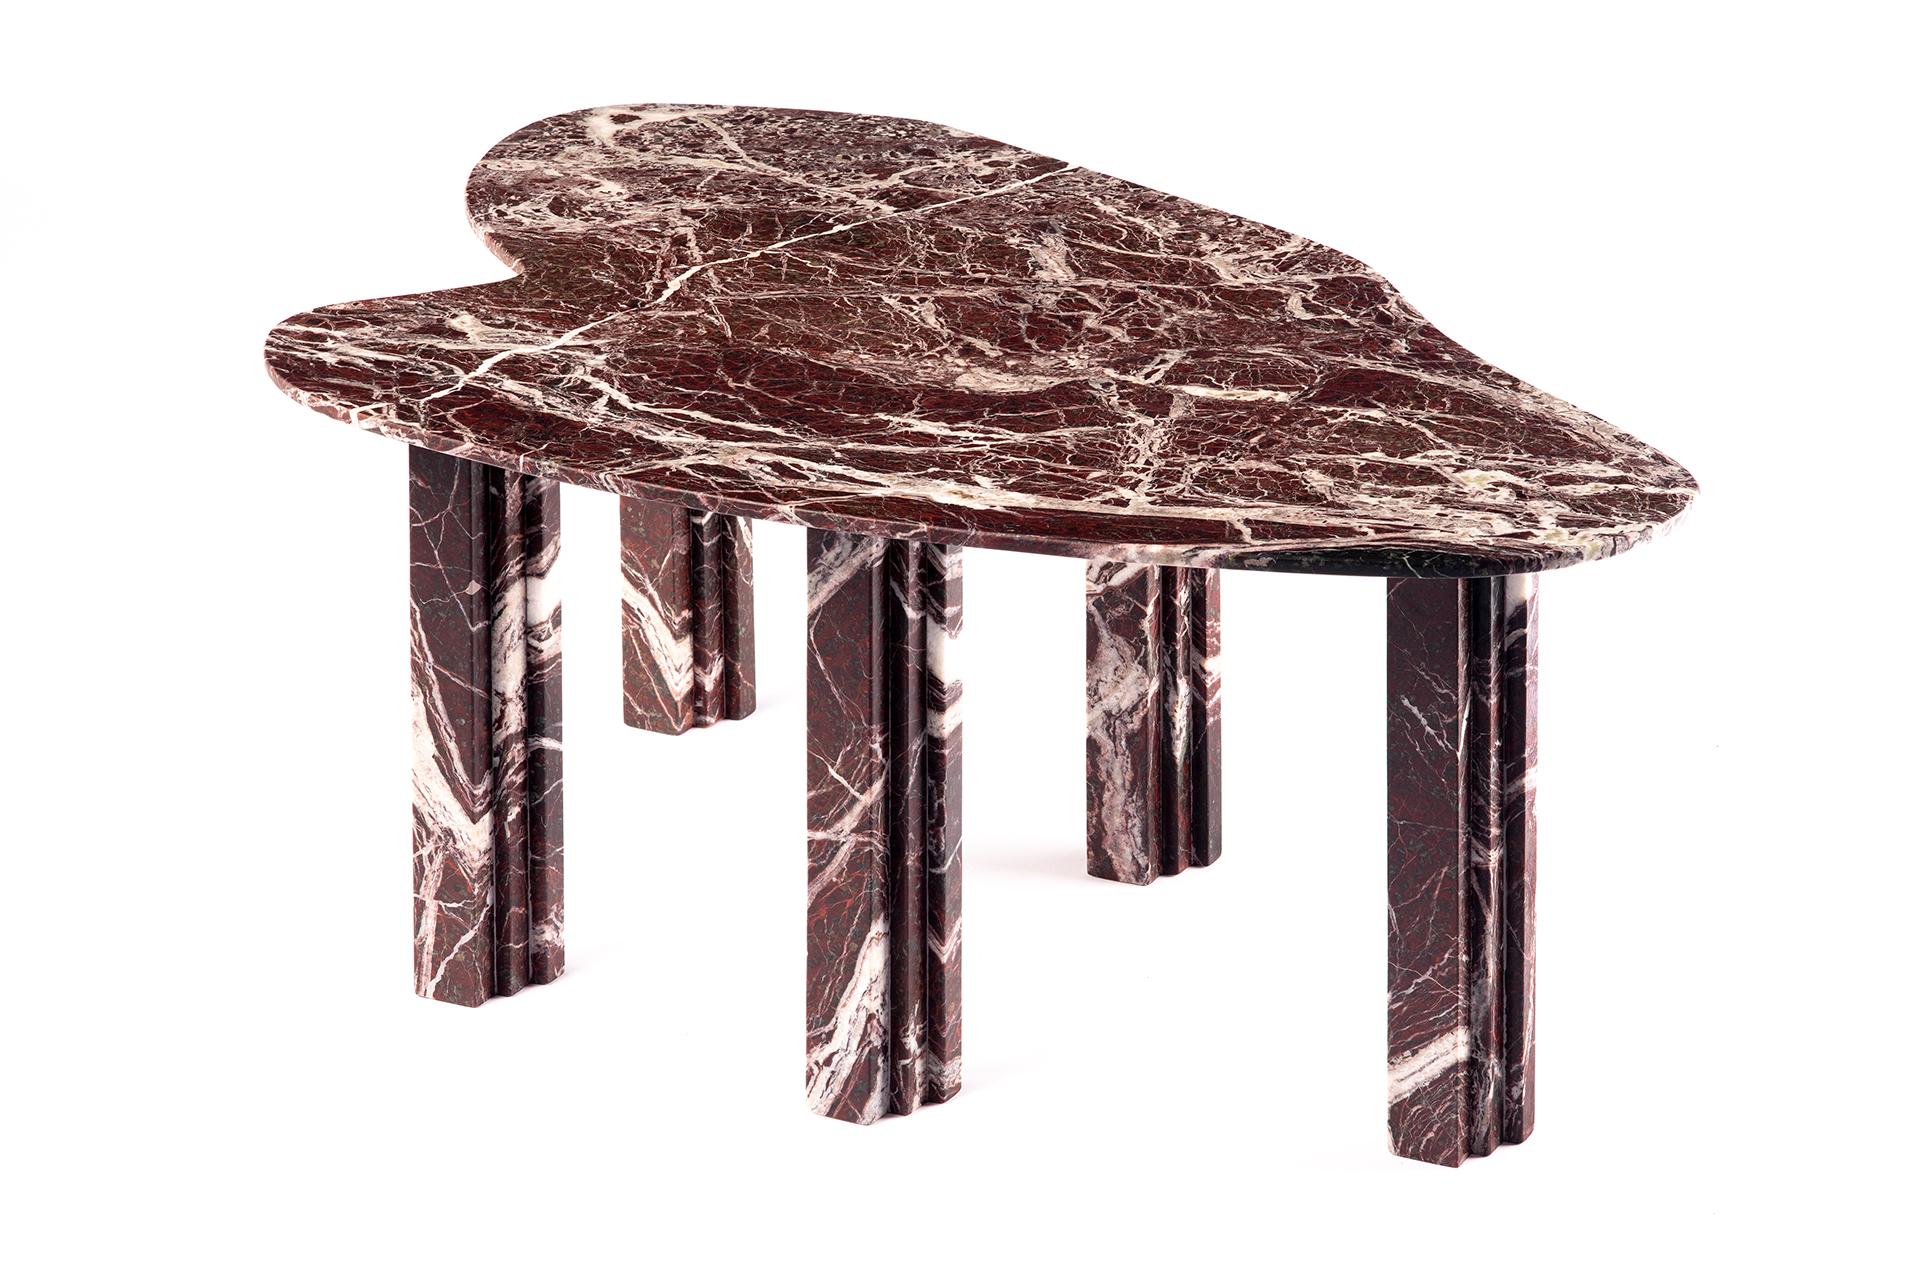 Sculptural red marble dining table signed by Lorenzo Bini
Title: She said
Measures: 190 x 125 x H 73,5 cm
Material: Rosso Levanto

Also available as a Coffee table 95 x 63 x H 37 cm


Six tableaux is a series of marble tables designed by